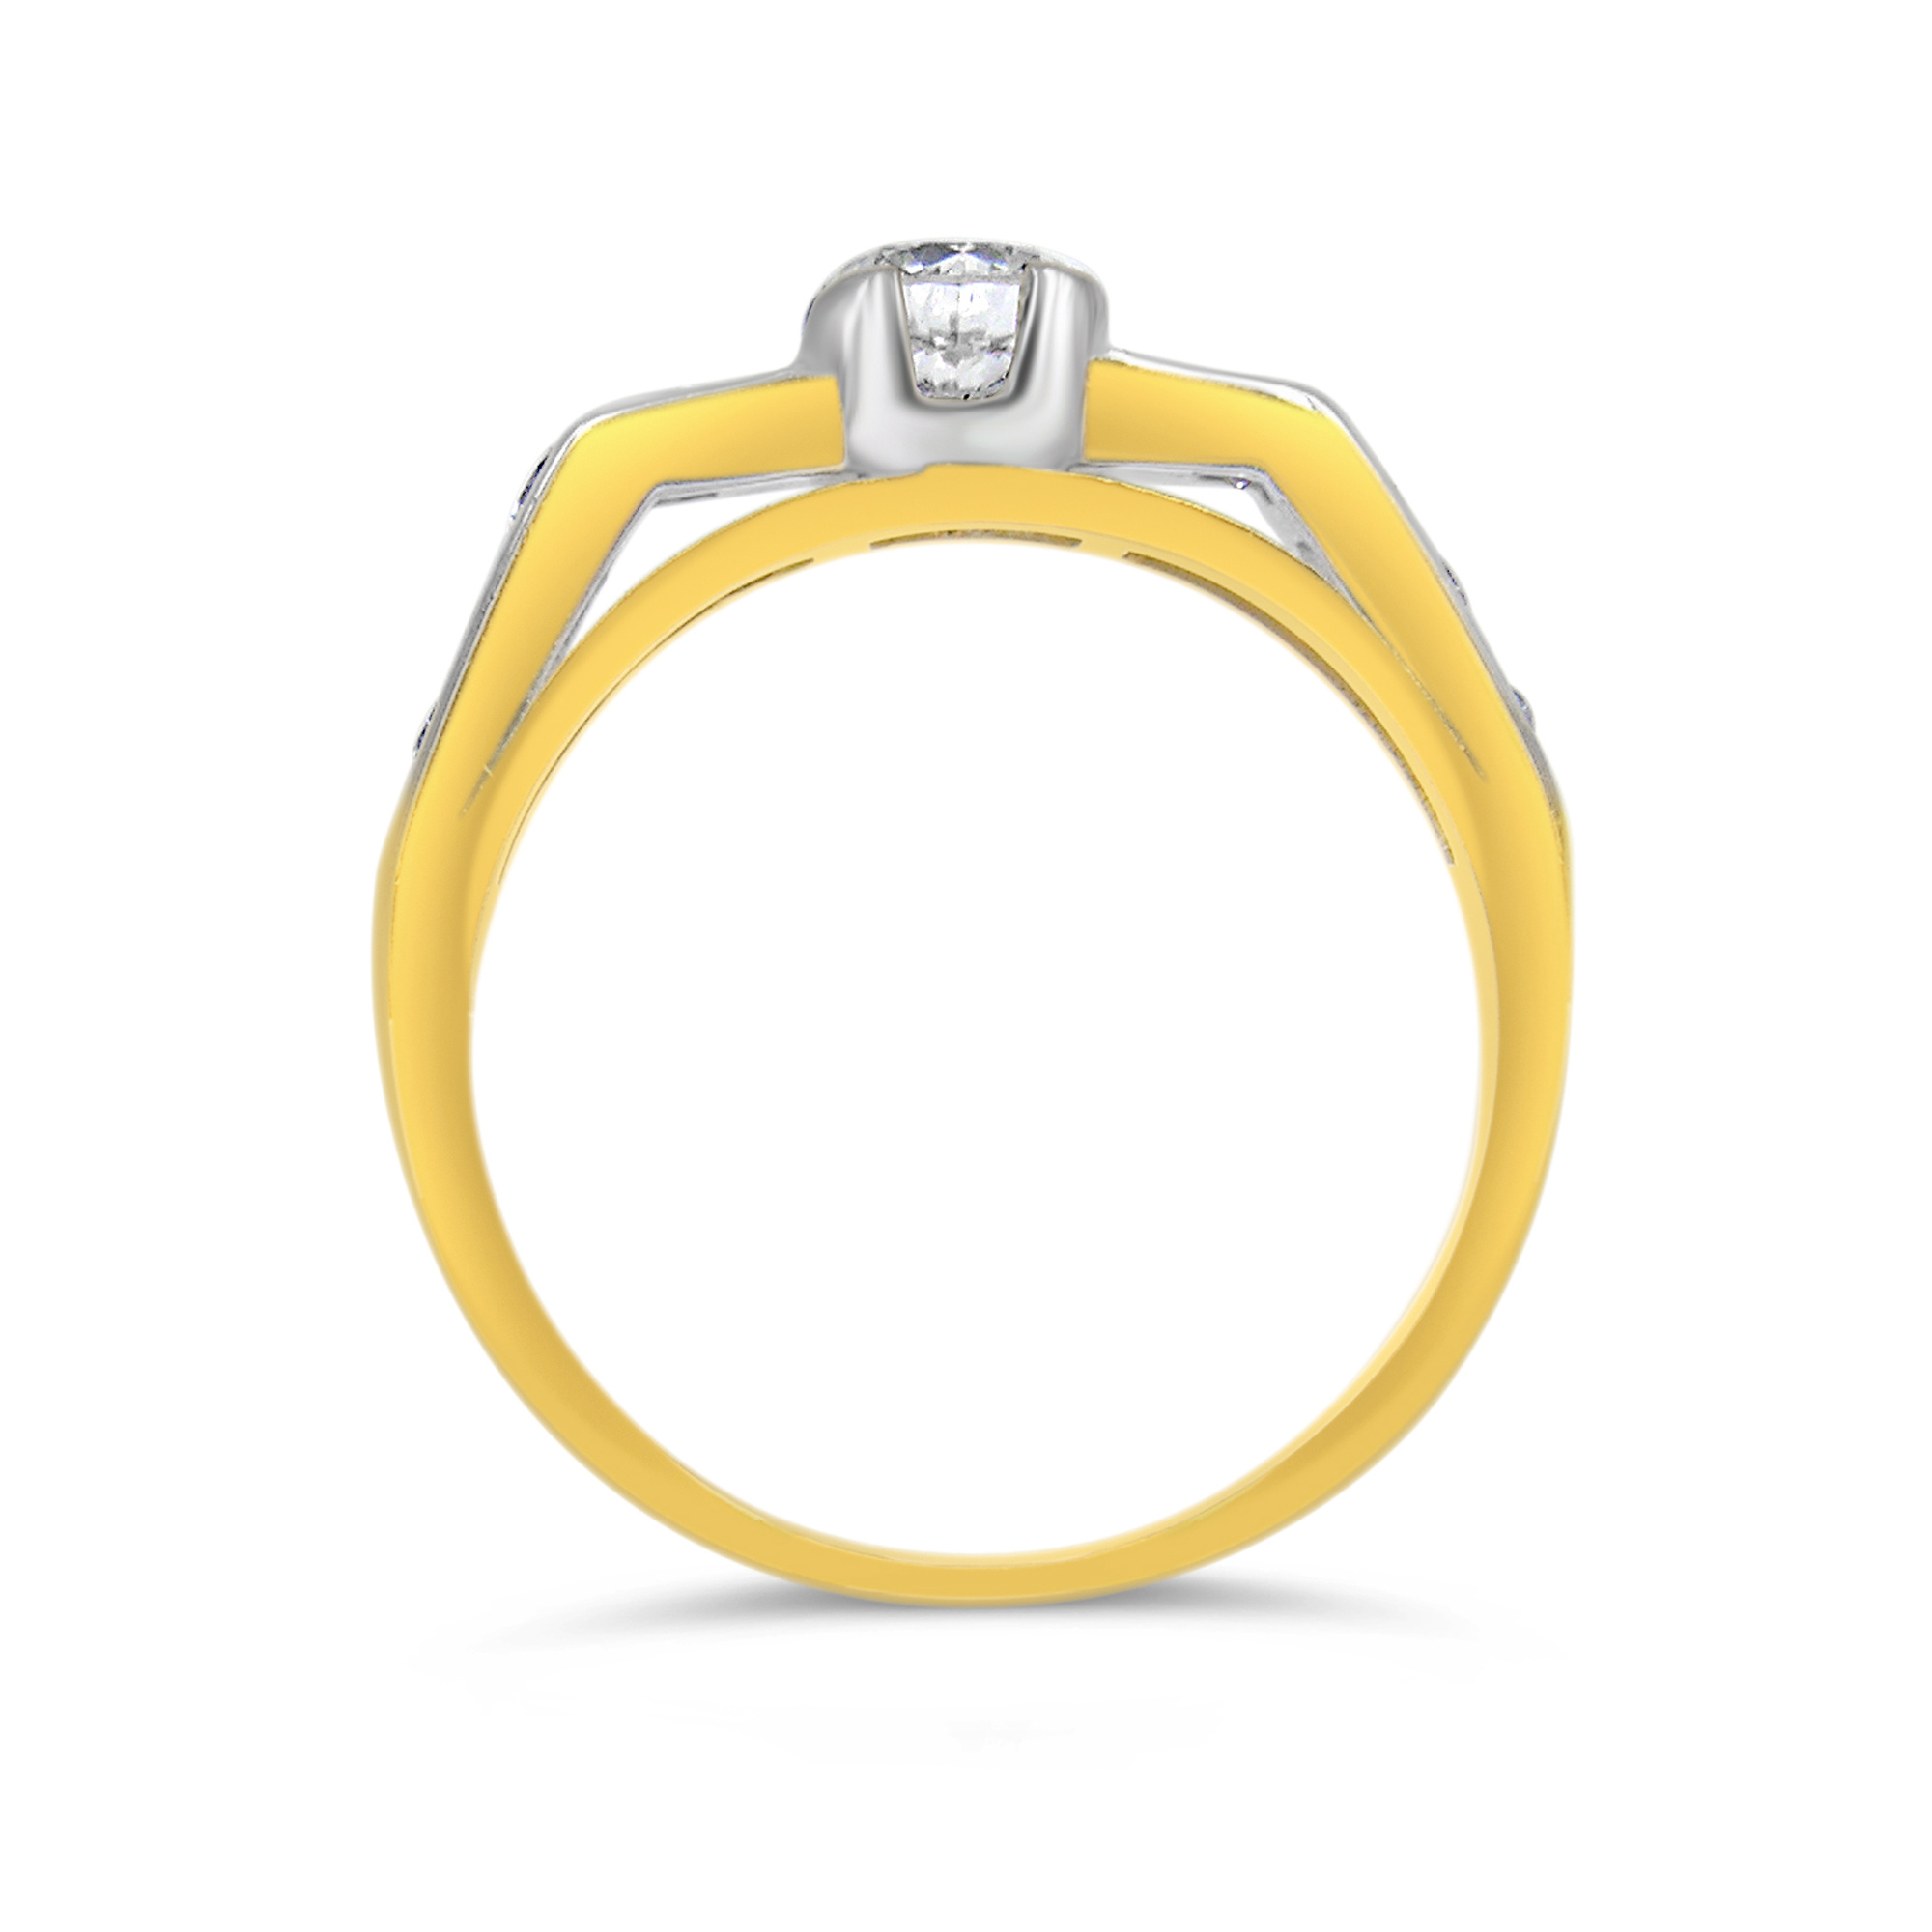 18kt yellow gold engagement ring with 0.94 ct diamonds